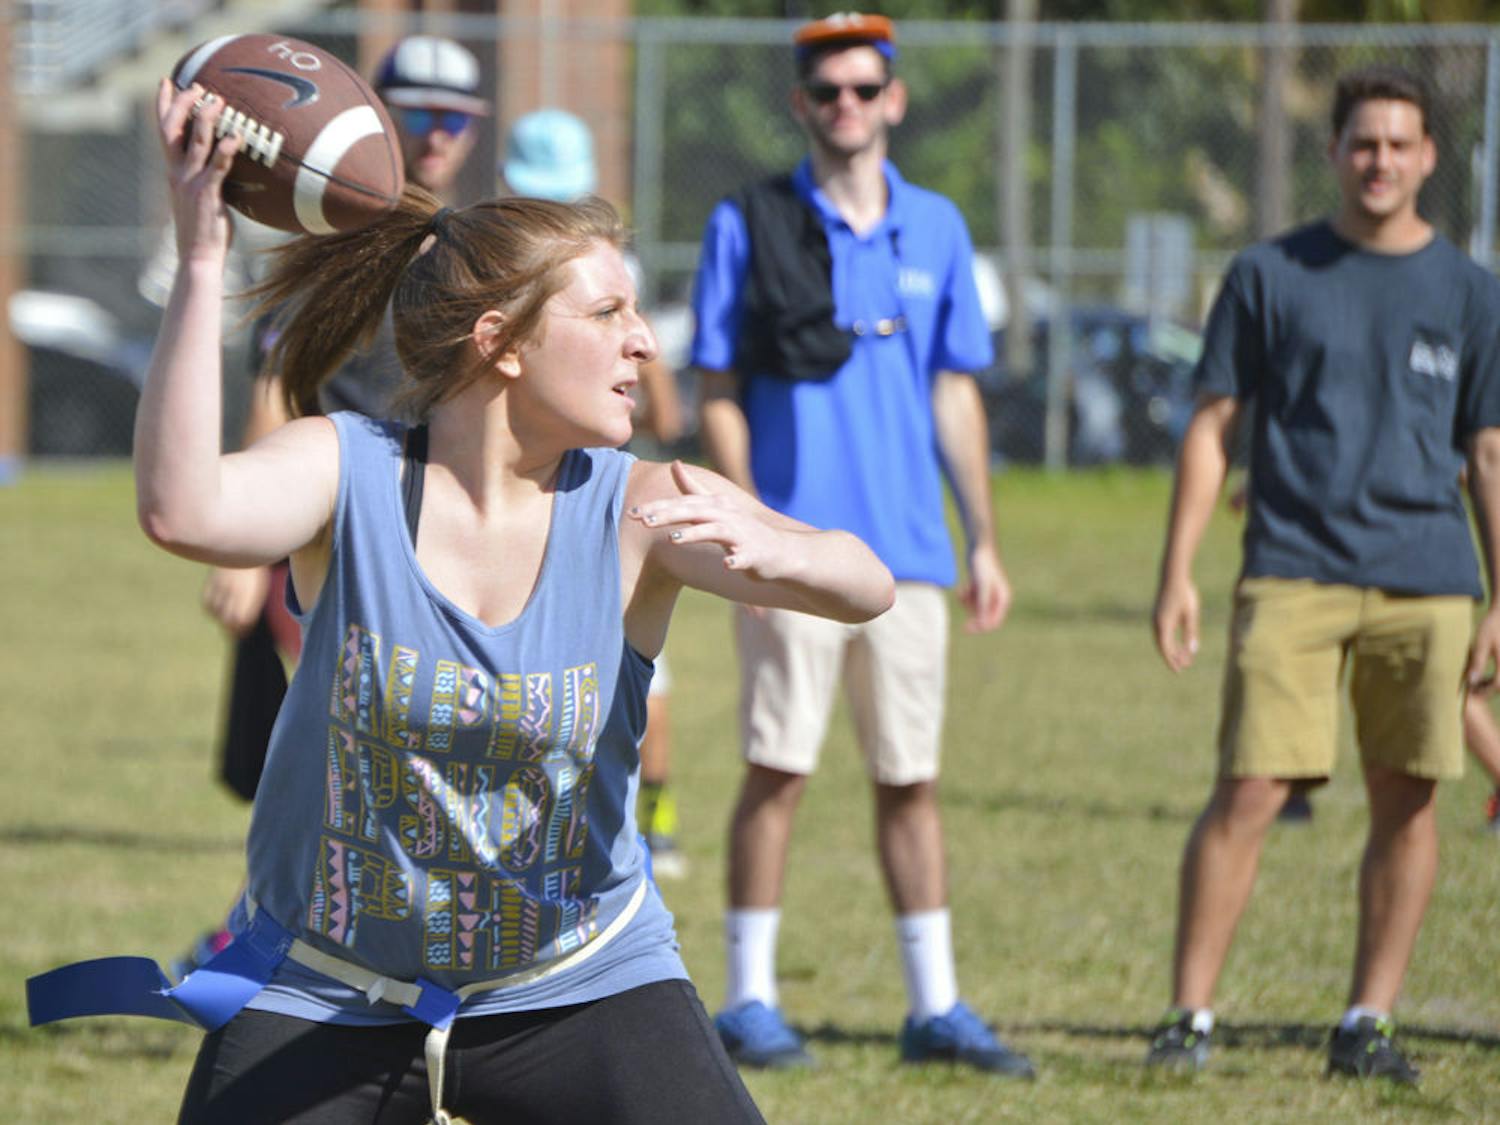 UF junior Ashey Rocque, 20, plays flag football with Alpha Epsilon Phi at Norman Field on Oct. 11, 2015. Alpha Epsilon Phi won 6-0 against Phi Mu. The sororities competed in the TEP Touchdown philanthropy event, which raised money for the American Cancer Society.